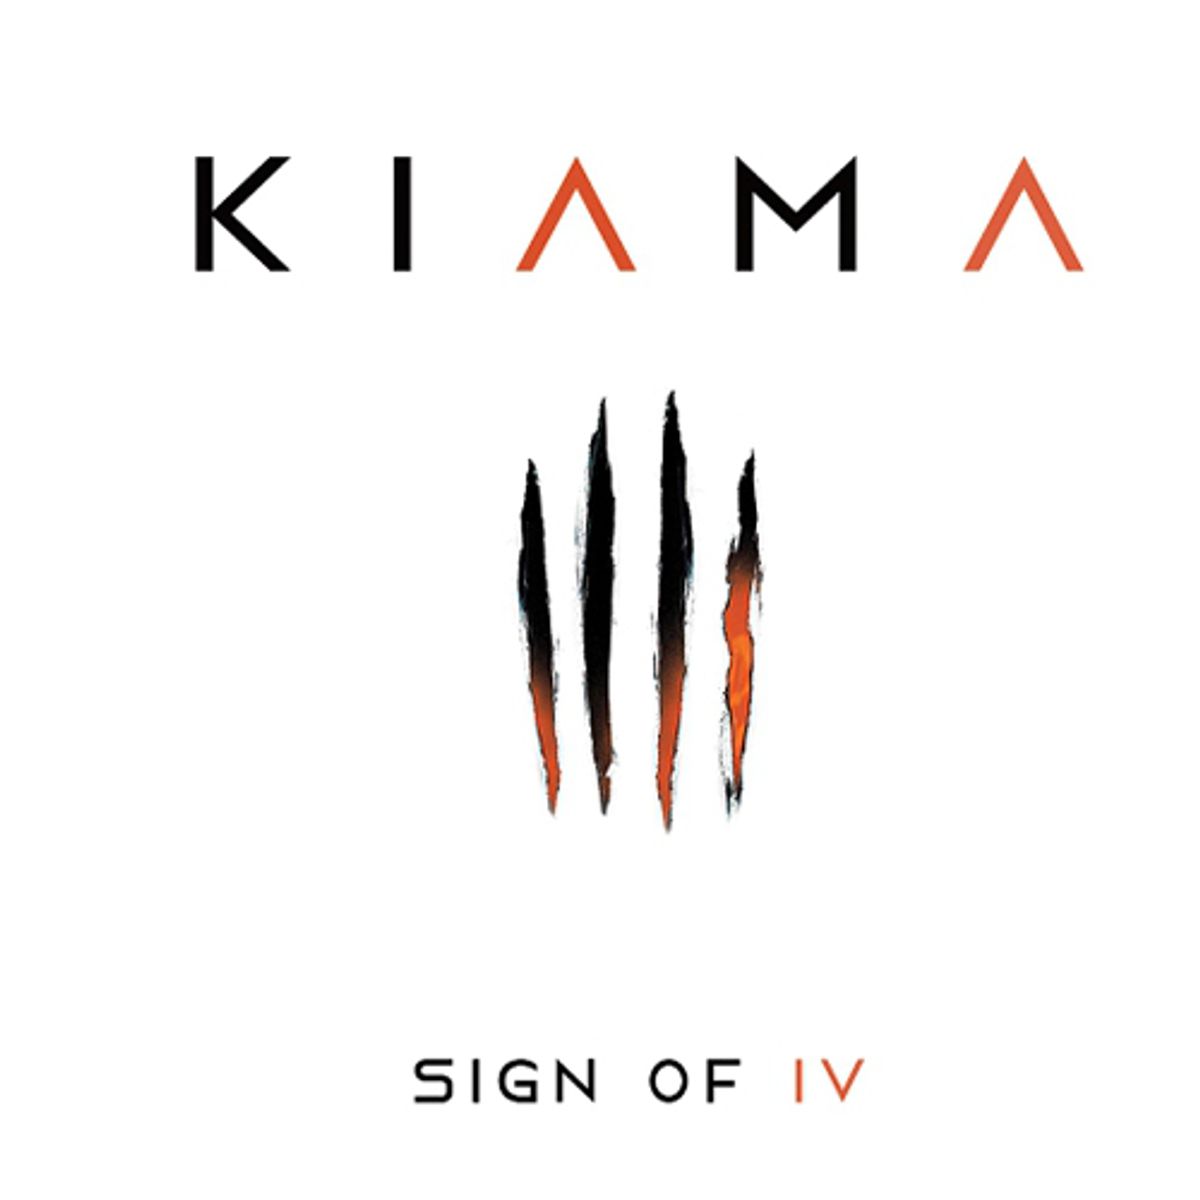 Sign of IV